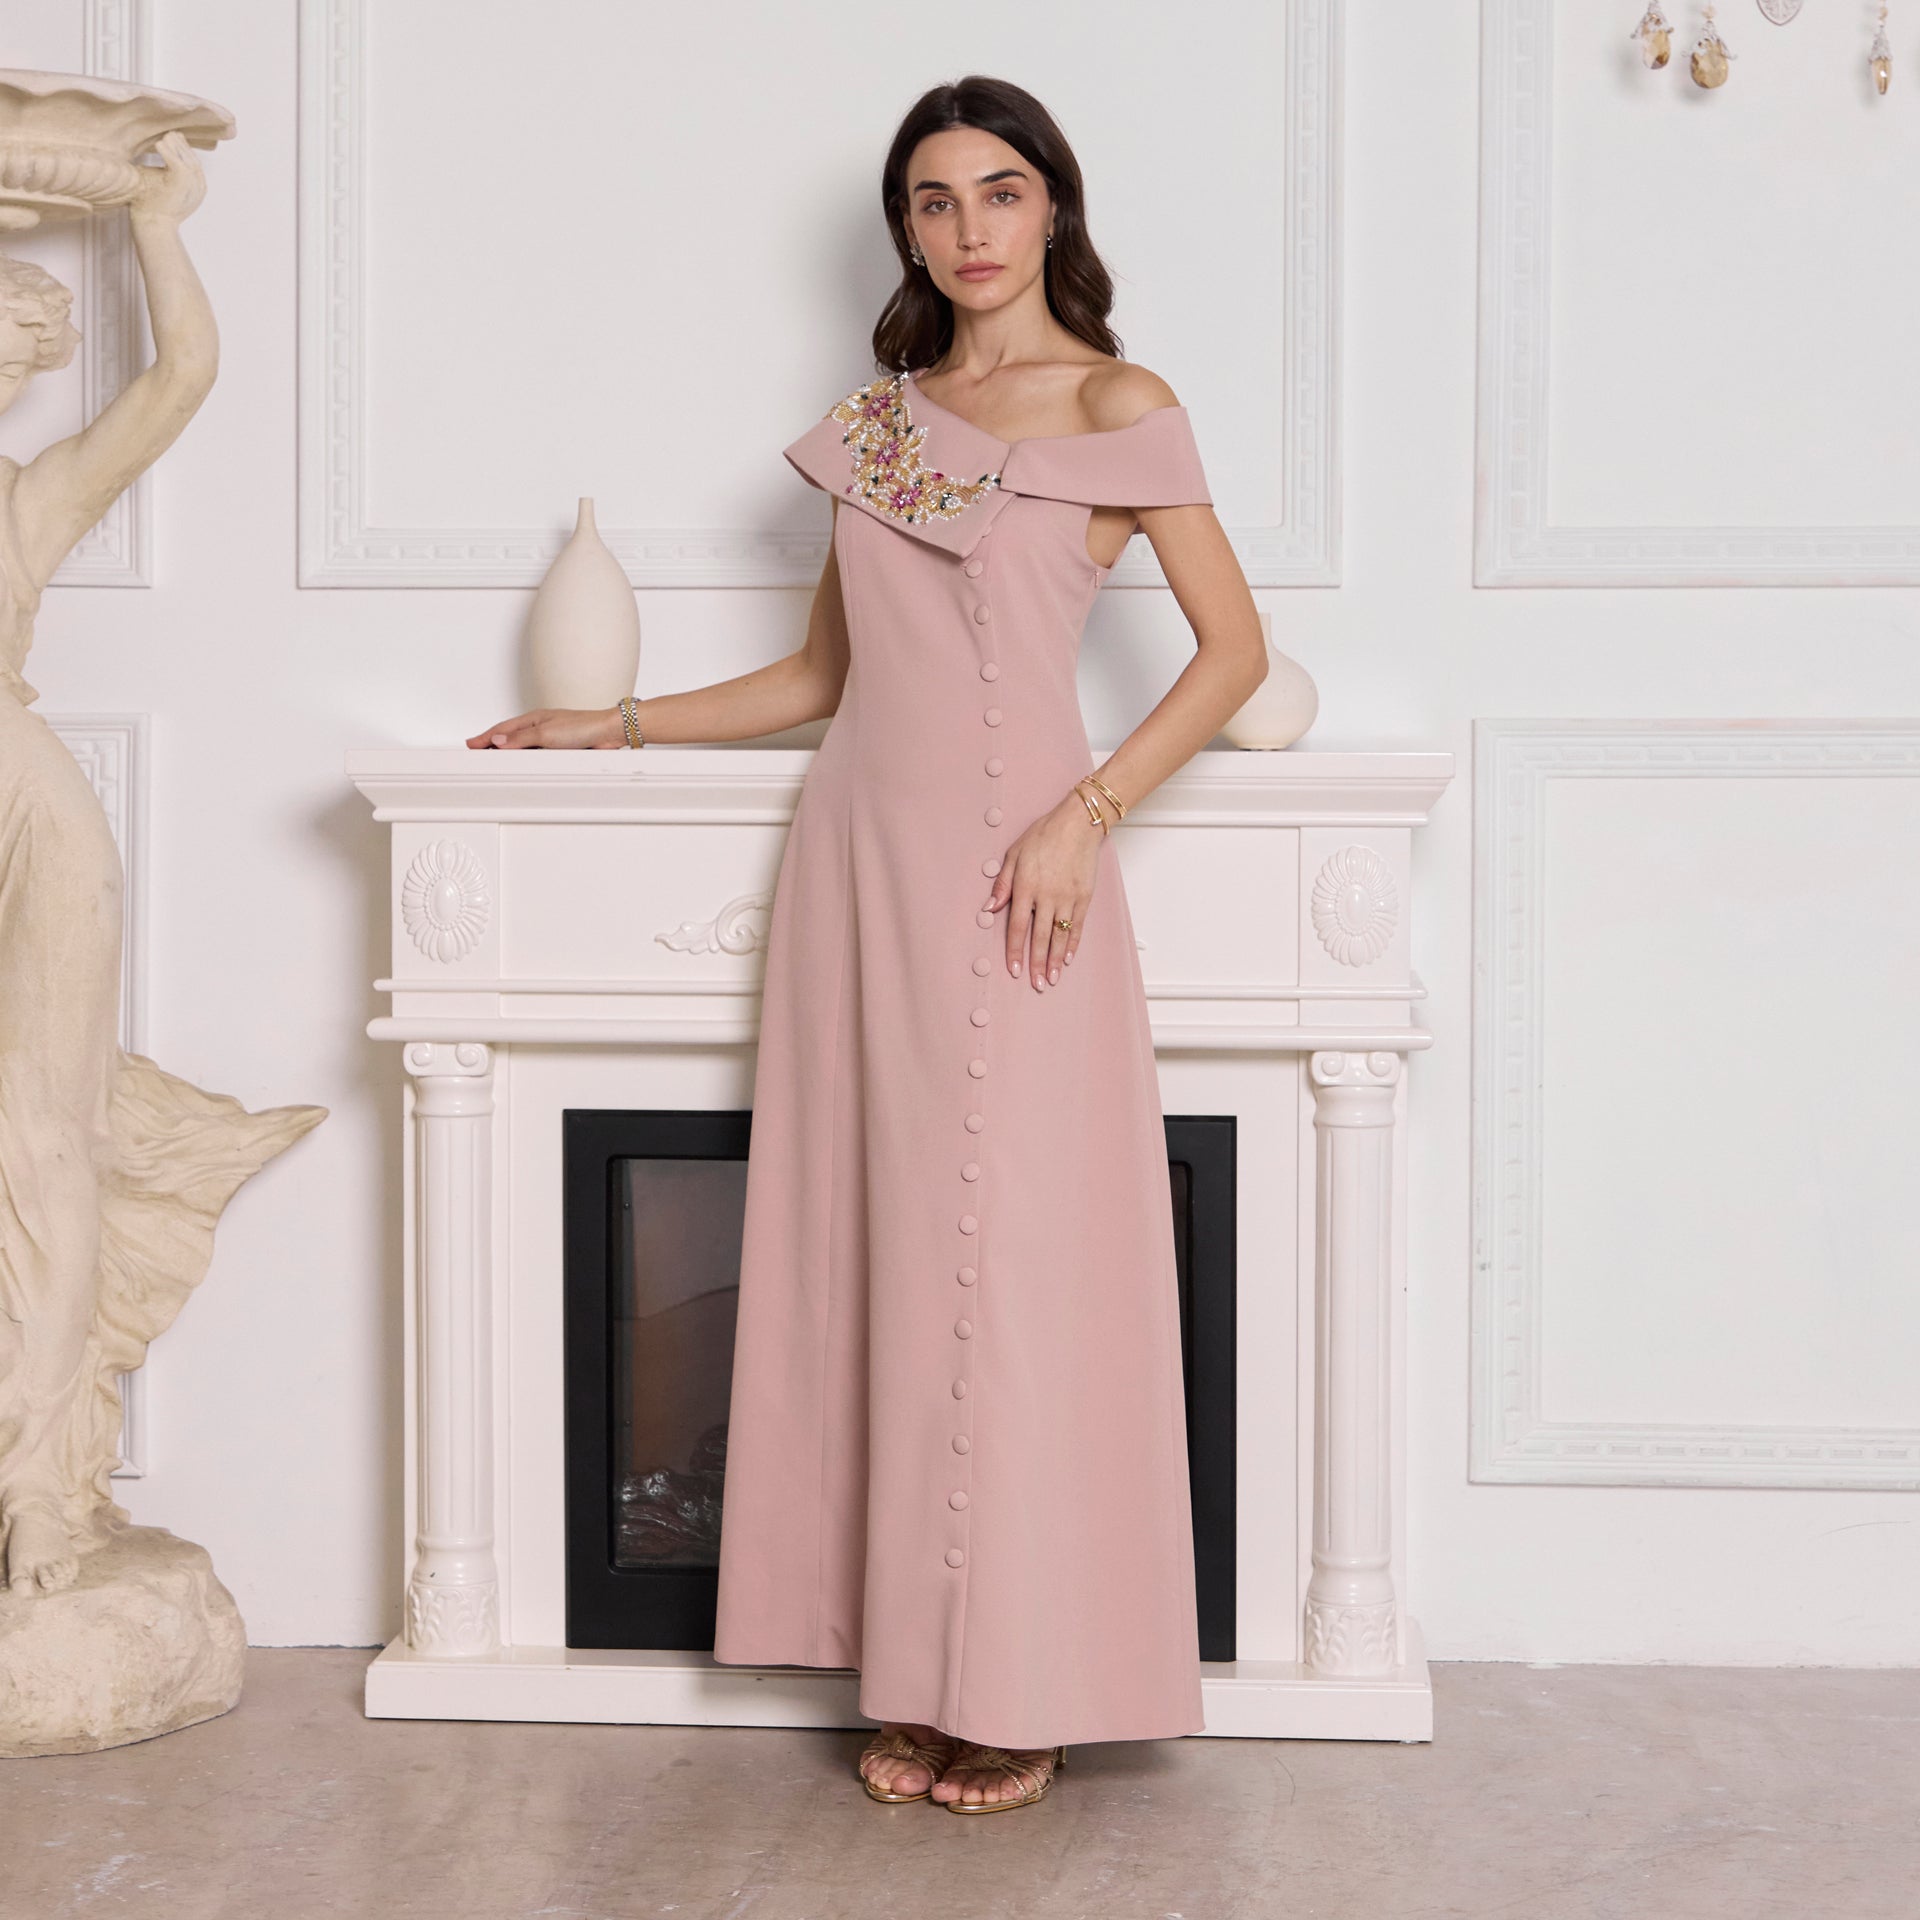 Pink Luxurious Crepe Dress with Tafta Flowers and Pearl Embellishments By Armoire